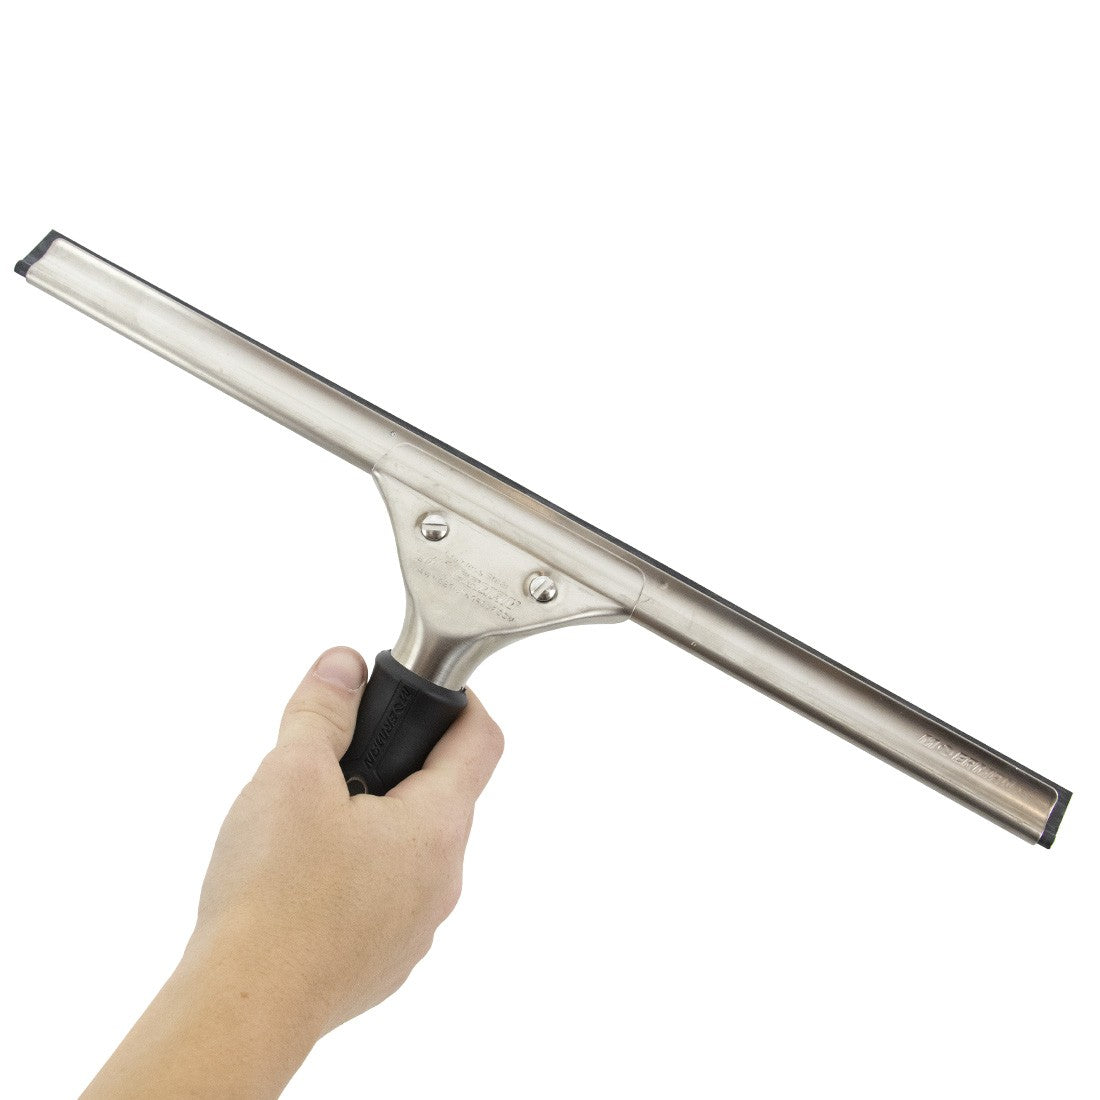 Window Cleaning Specialty Squeegees - Moerman, Wagtail, and more